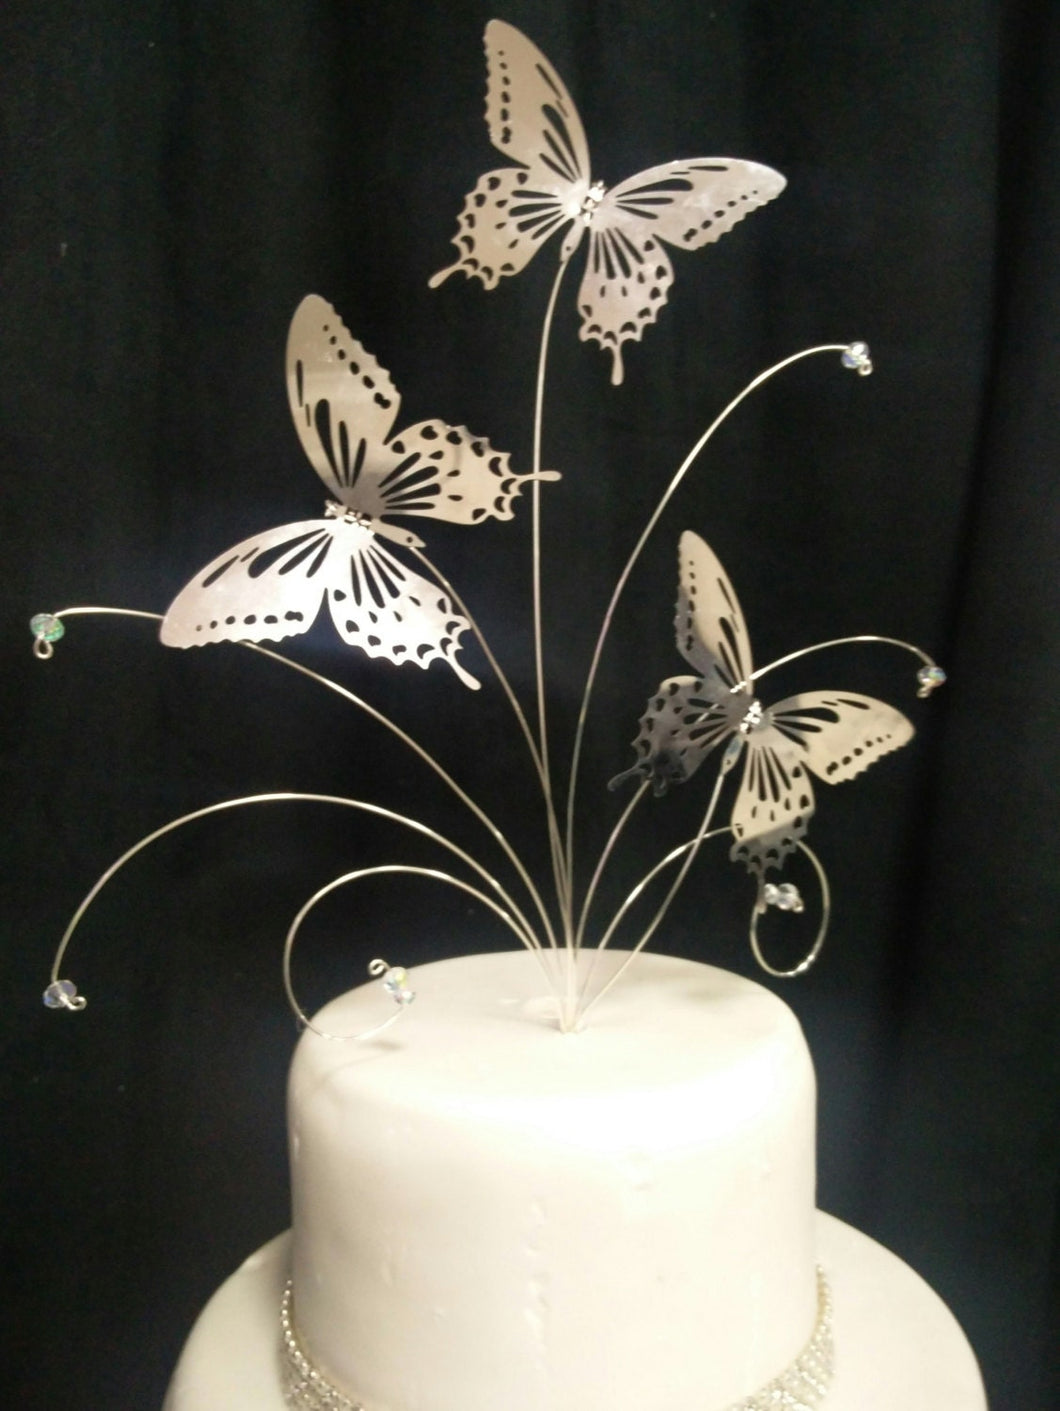 Butterfly and crystal arrangement cake topper- Gold or silver Tone by Crystal wedding uk